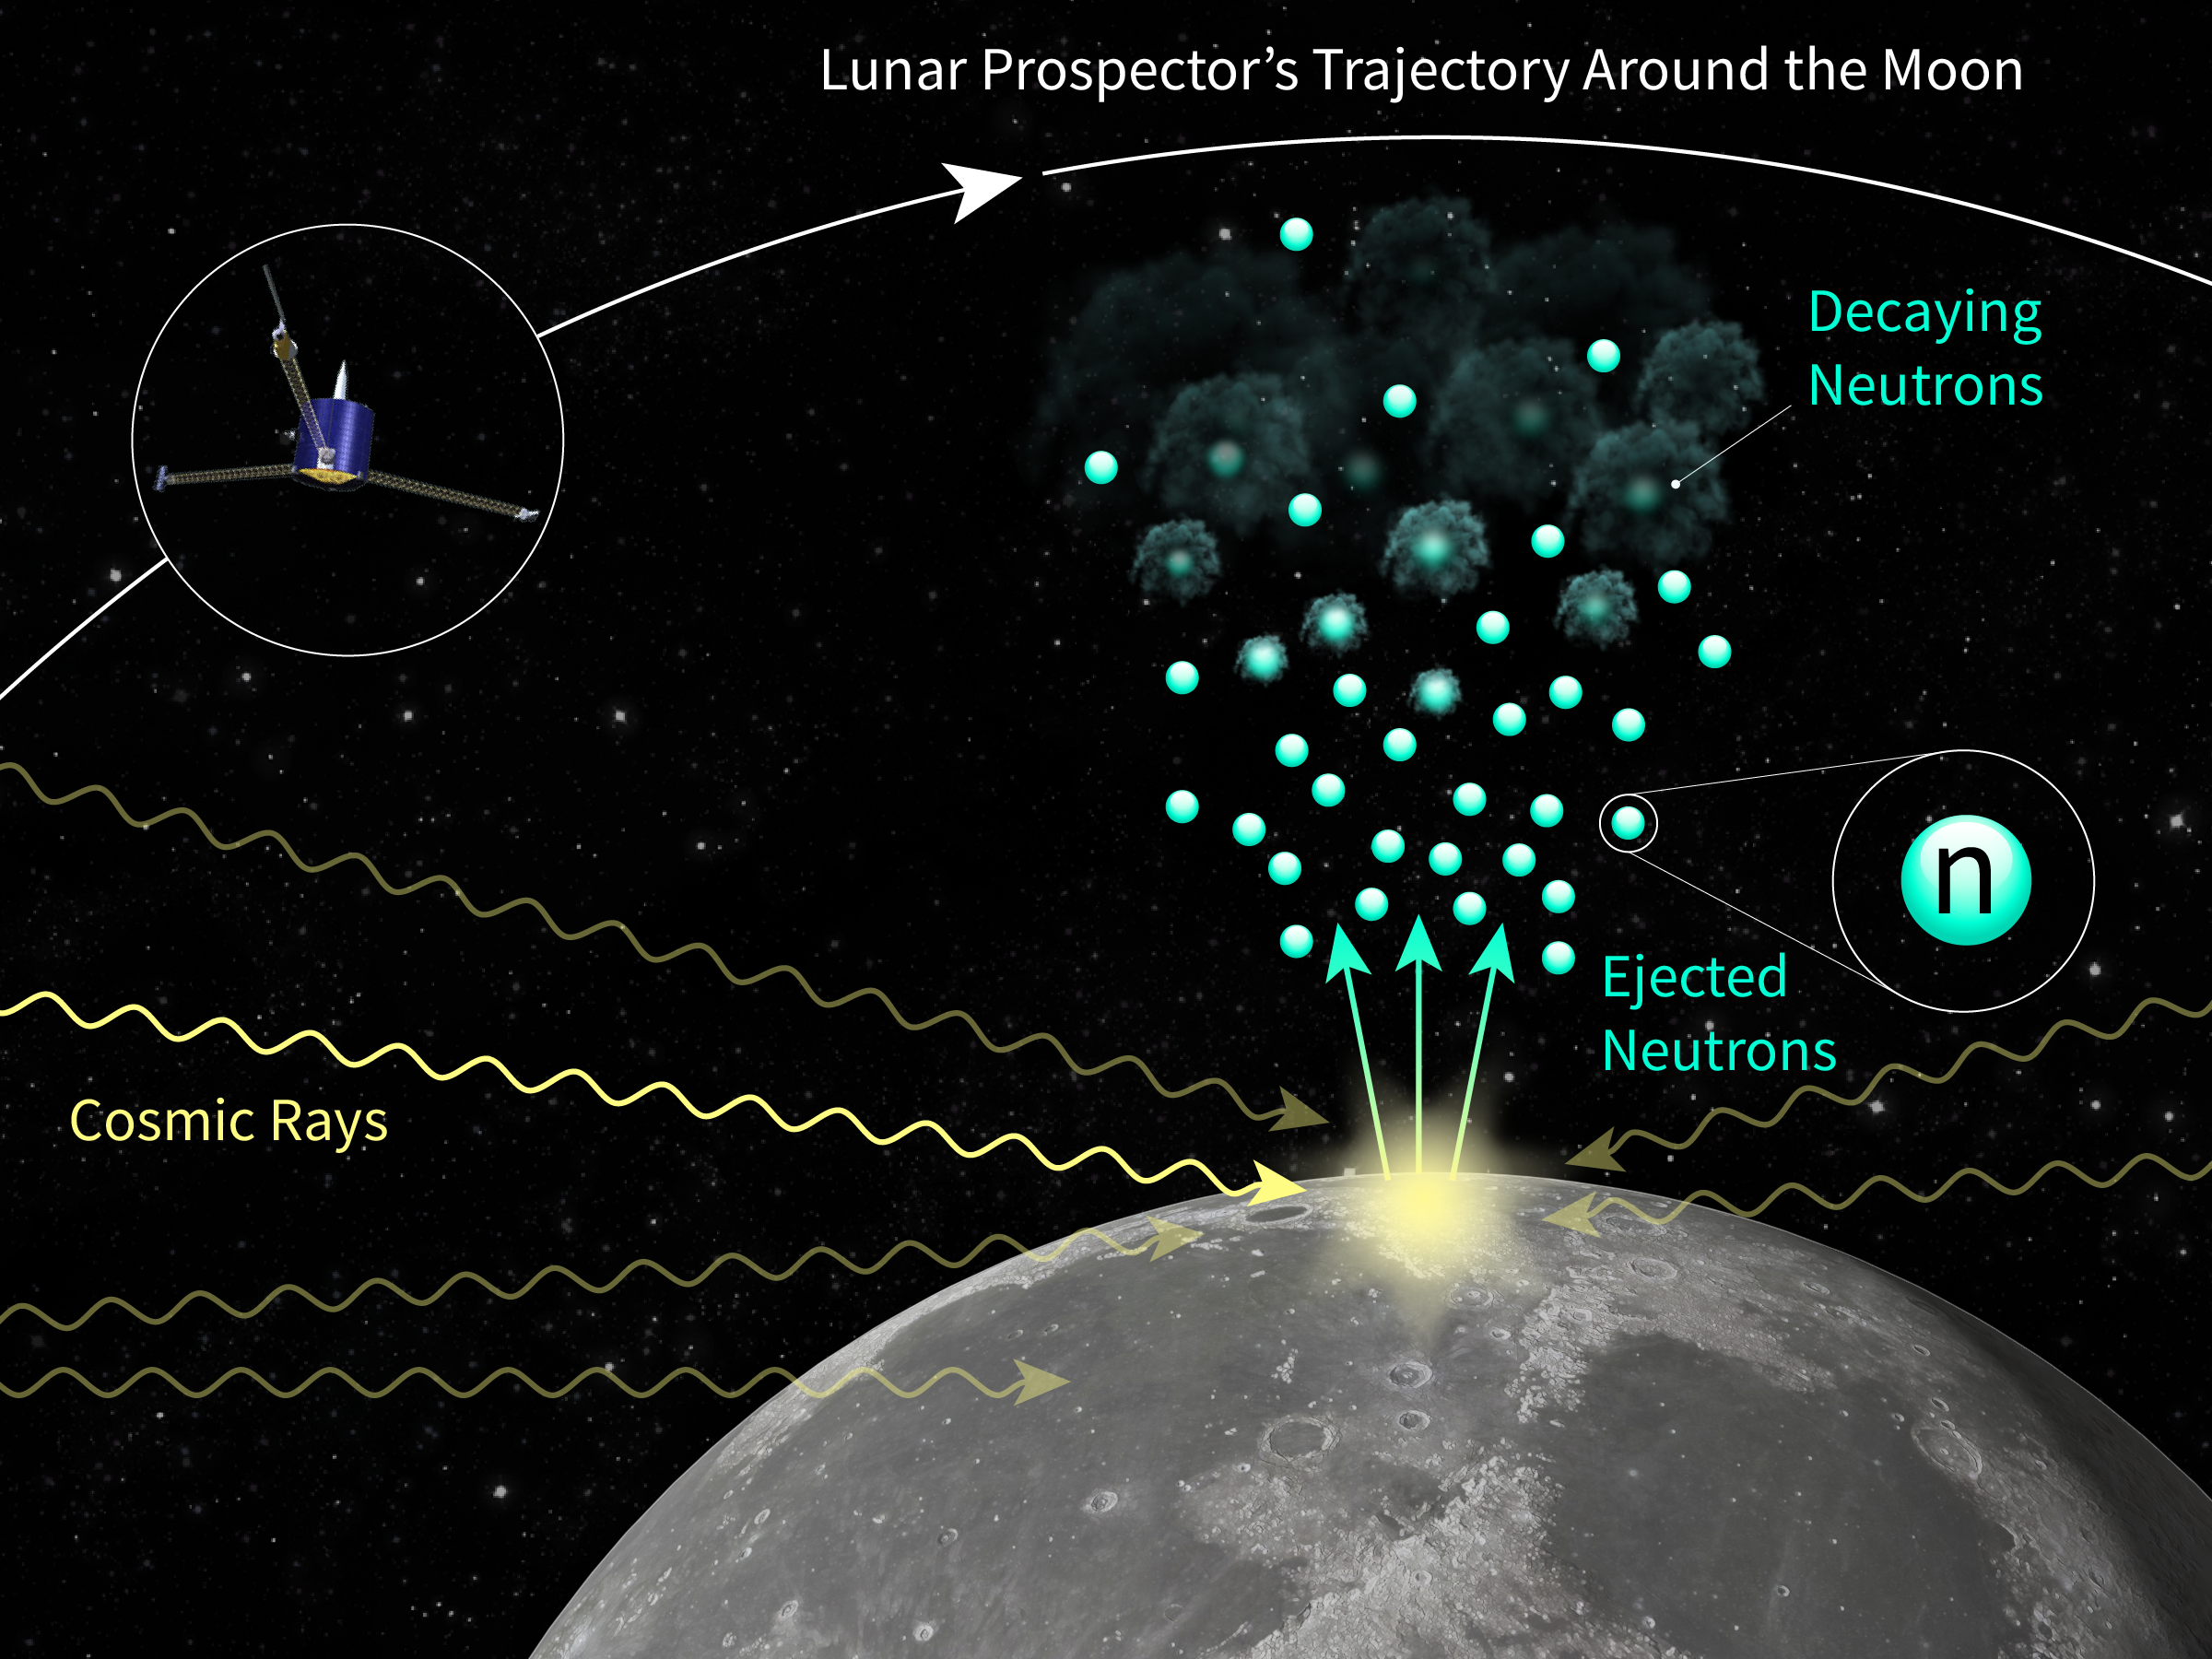 Illustration showing cosmic rays hitting the Moon and releasing green "neutrons" into the orbit of Lunar Prospector